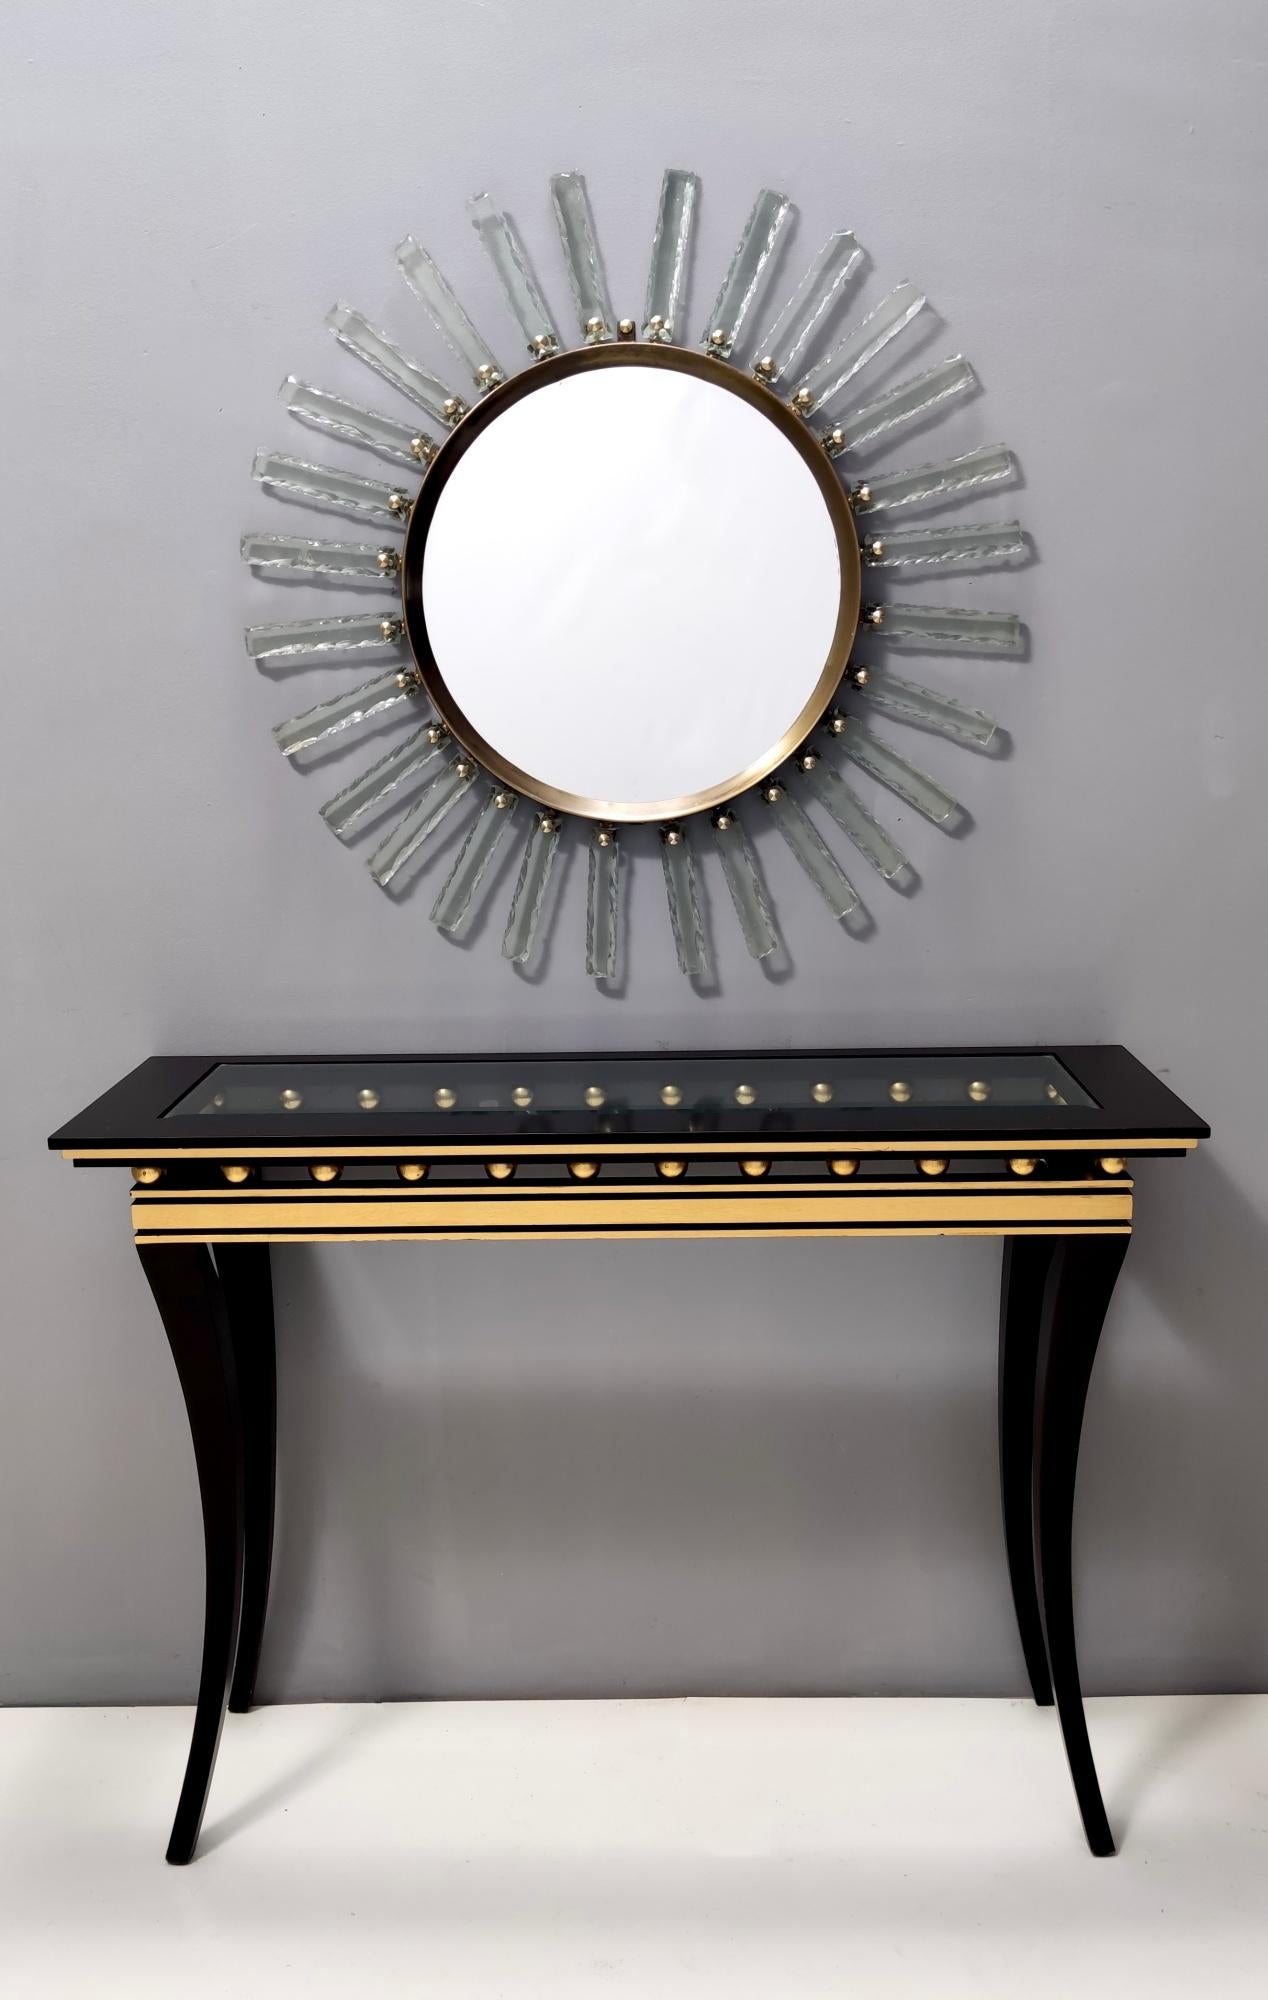 Made in Italy, 2022.
This mirror features a brass frame and green Nile hammered glass pieces that are 2.3 centimeters thick and are original from the 70s. As a matter of fact, this shade of glass is no longer available. 
Its imperfections are due to